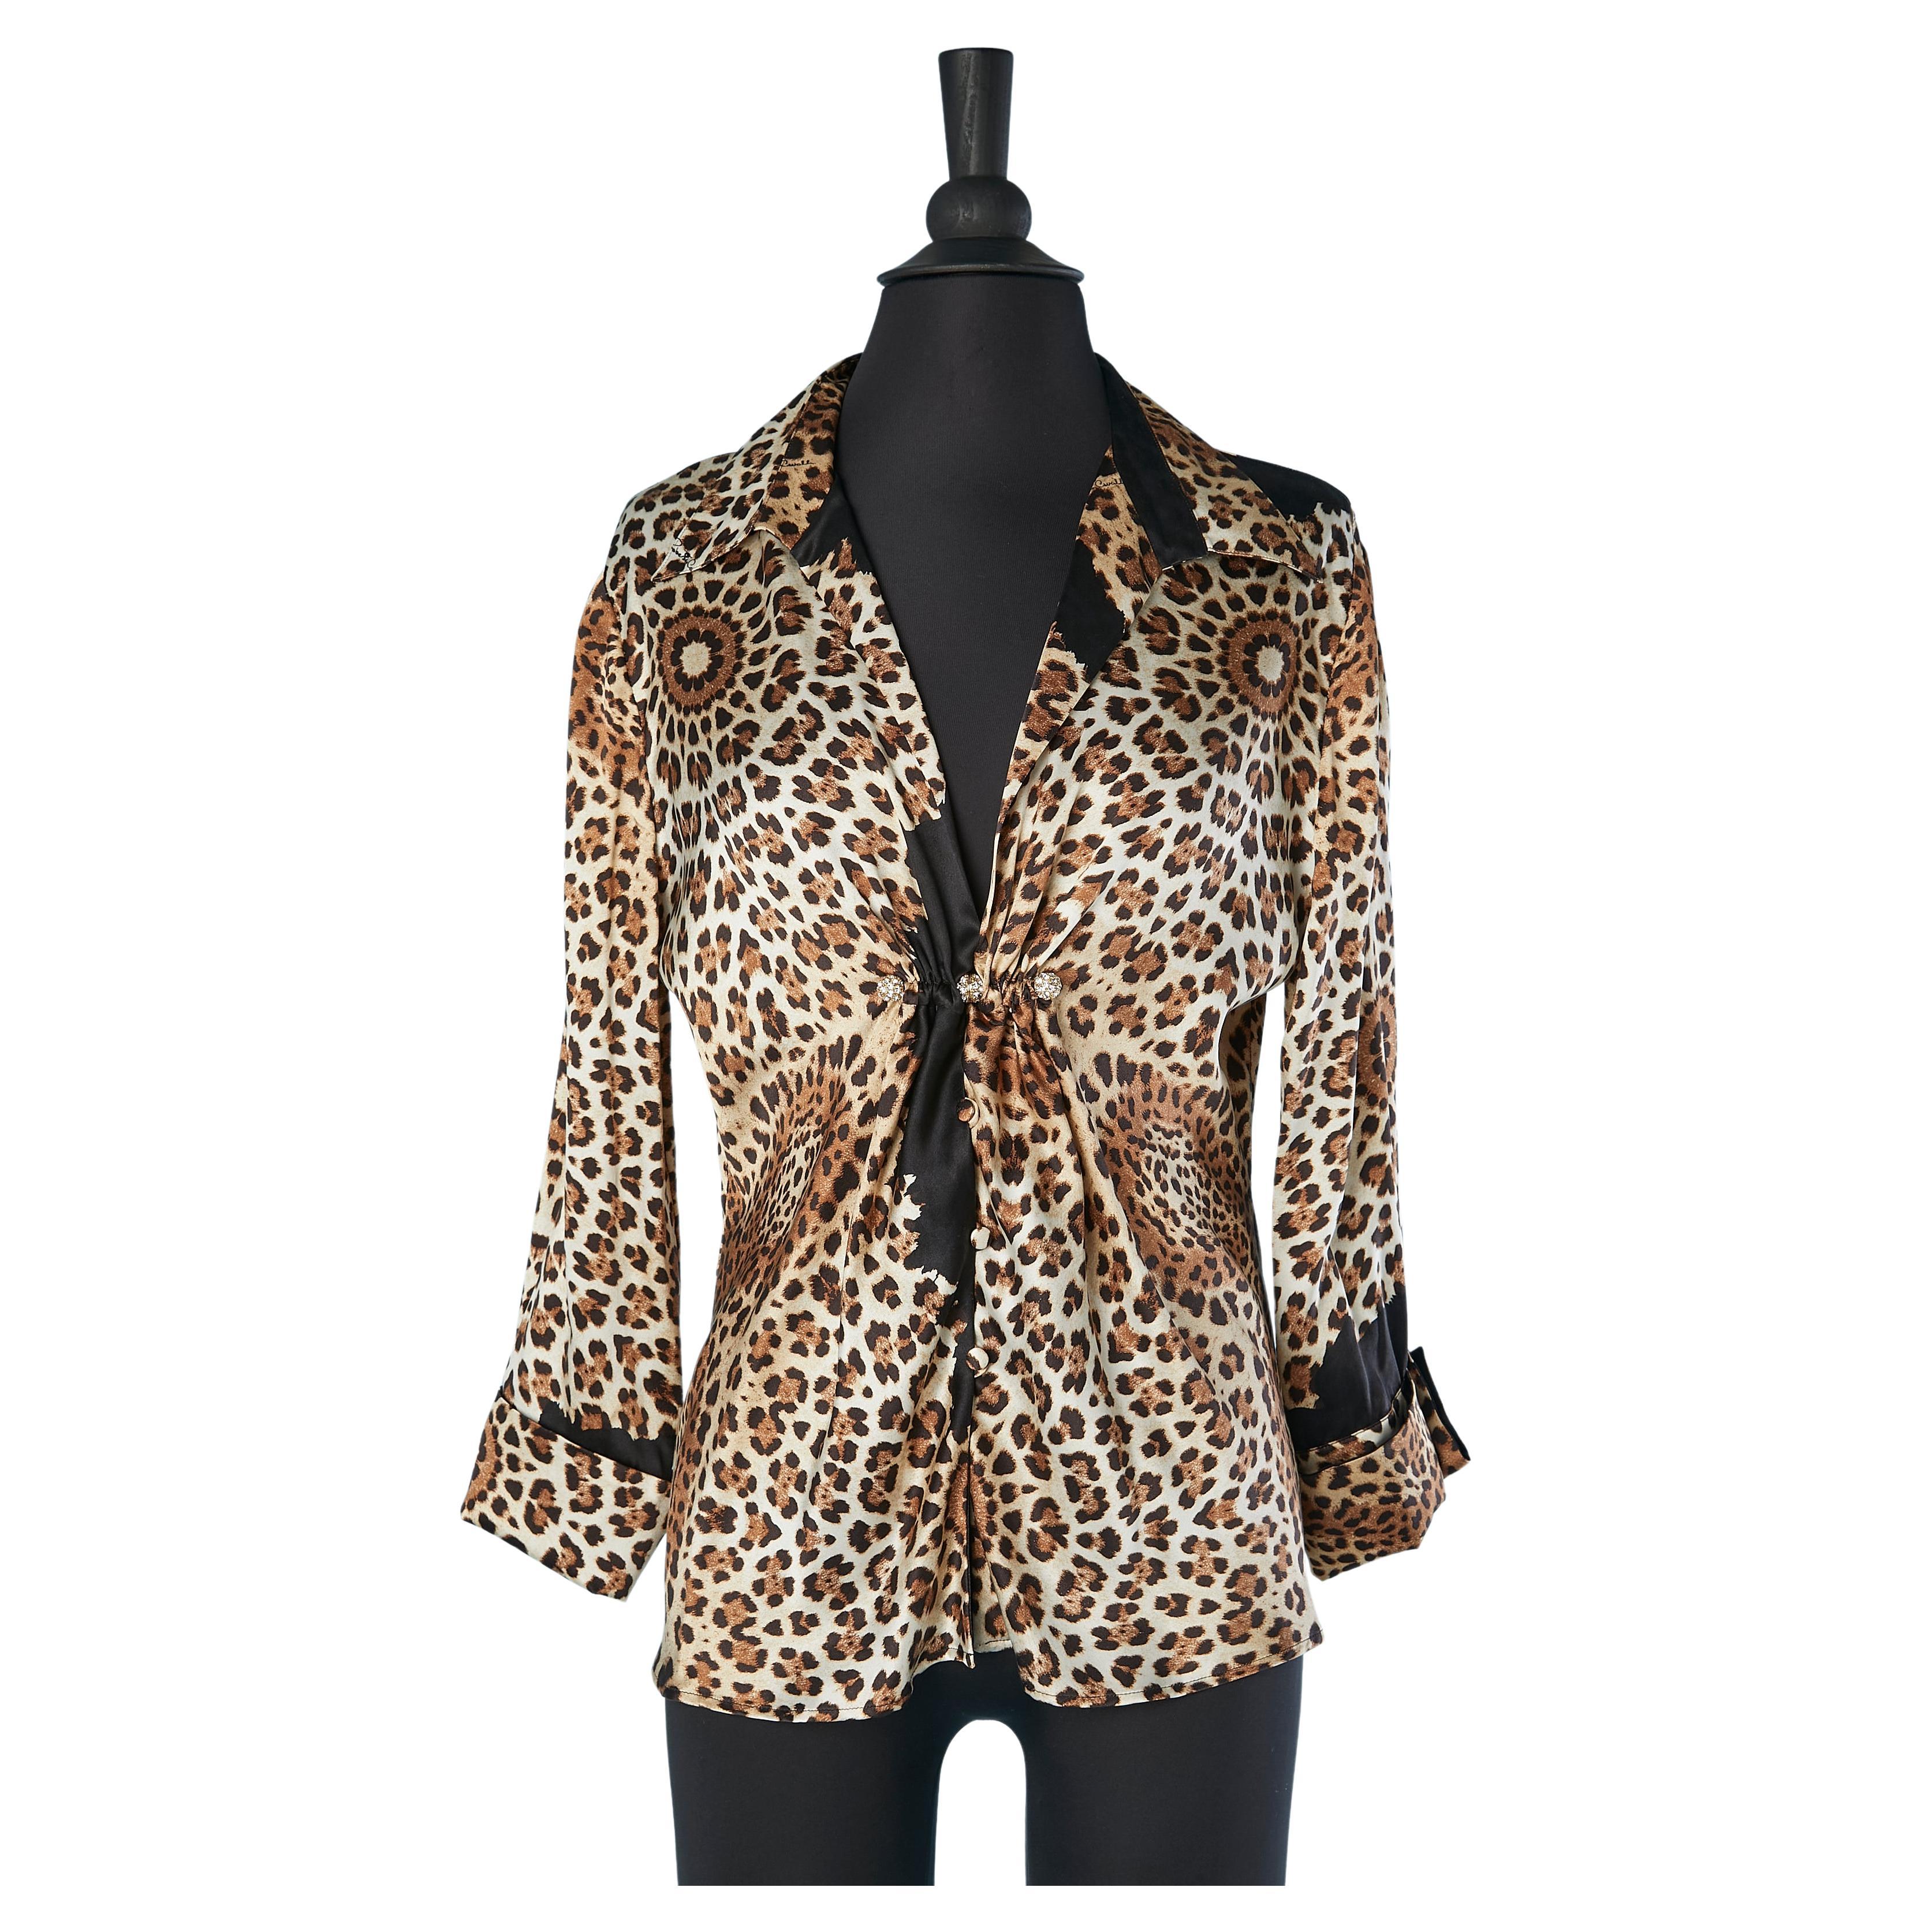 Silk leopard shirt with rhinestone brooch in the middle front Roberto Cavalli  For Sale